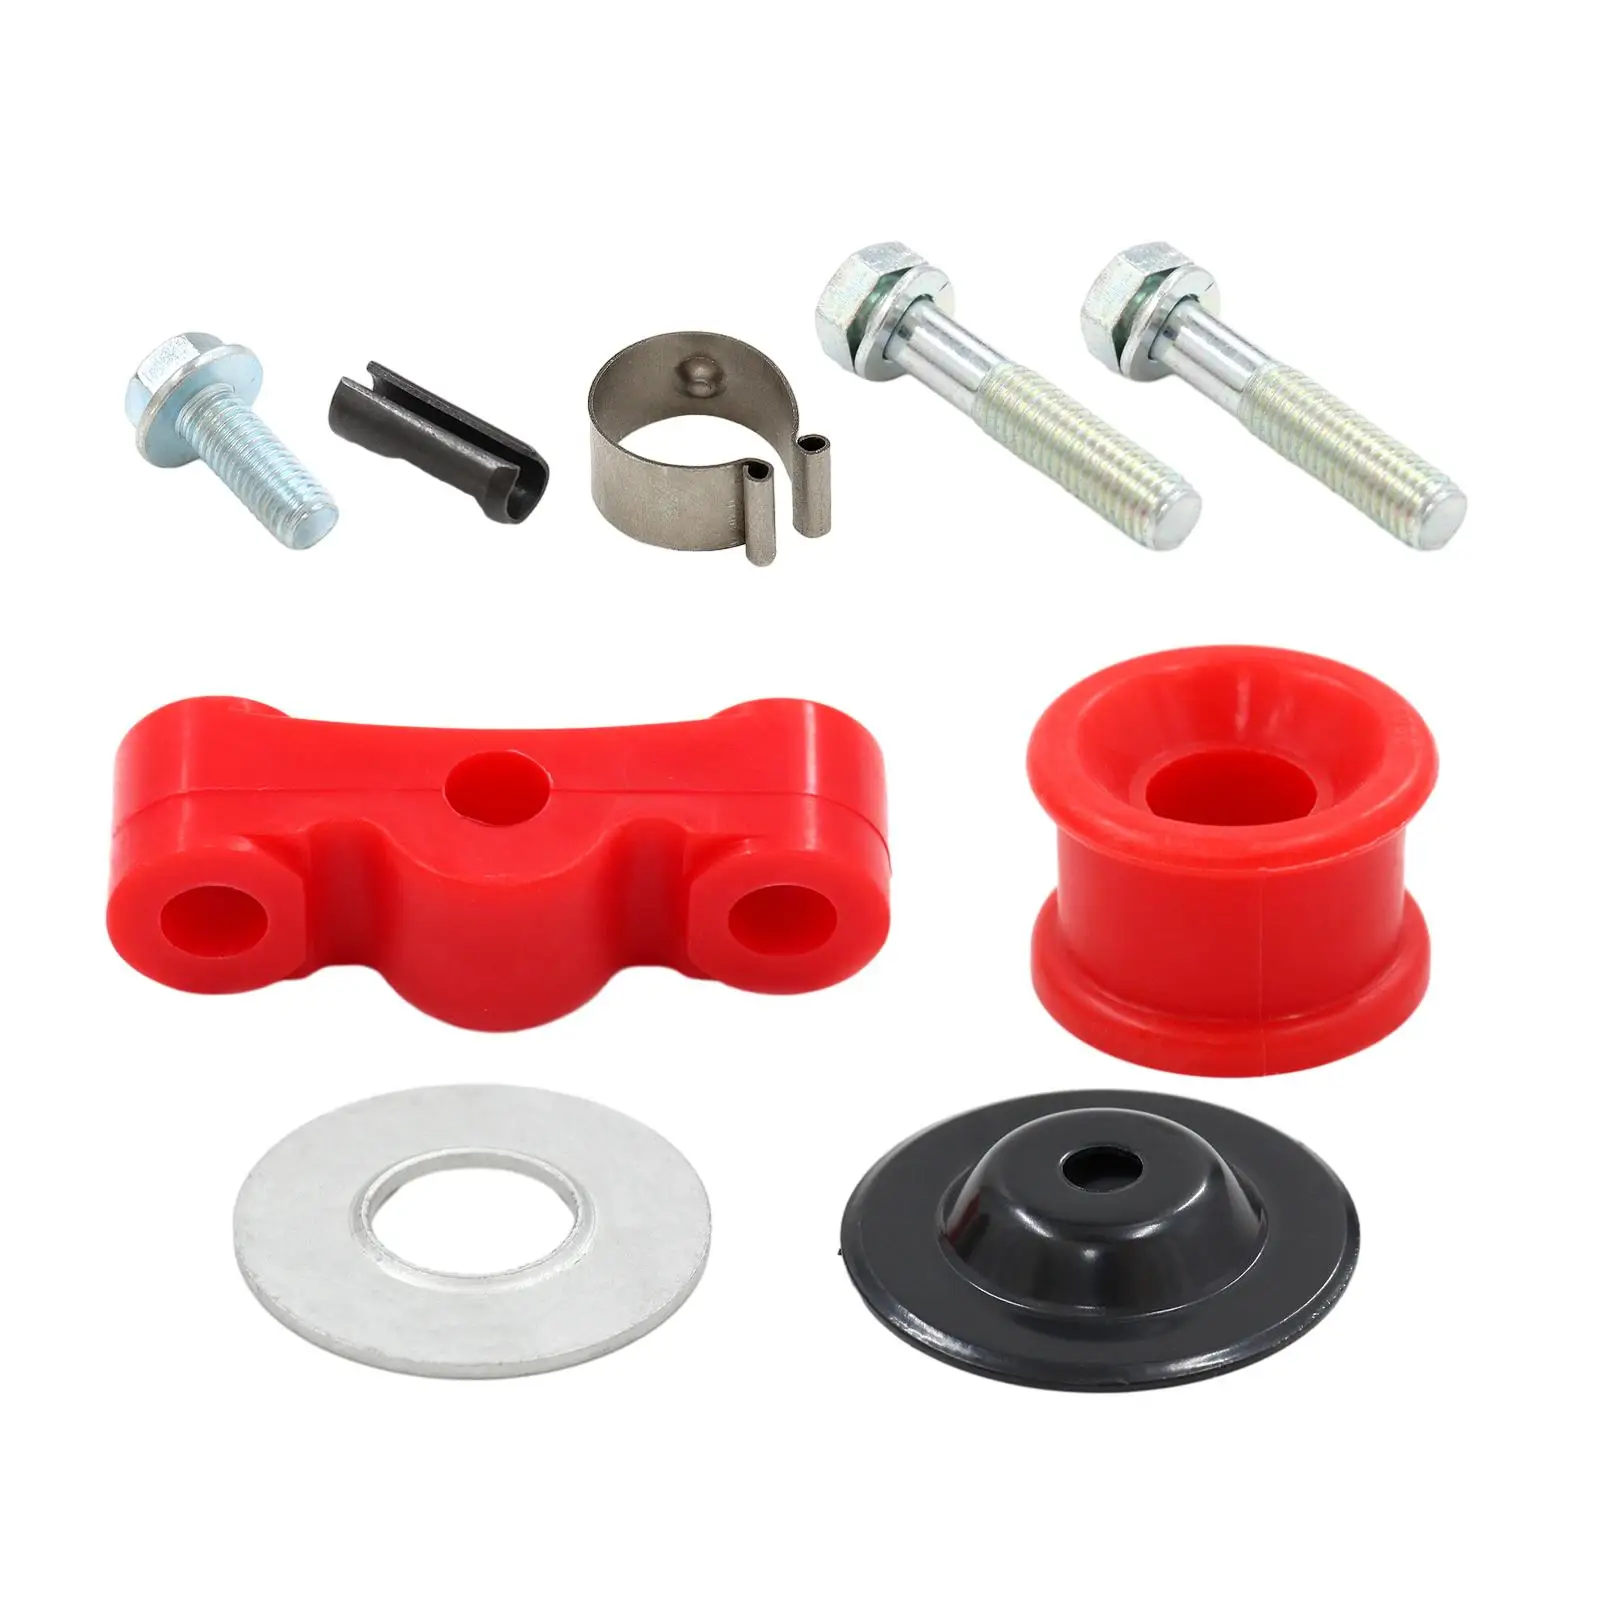 Red Shift Linkage Bushings Kit Auto Accessories for Honda Professional